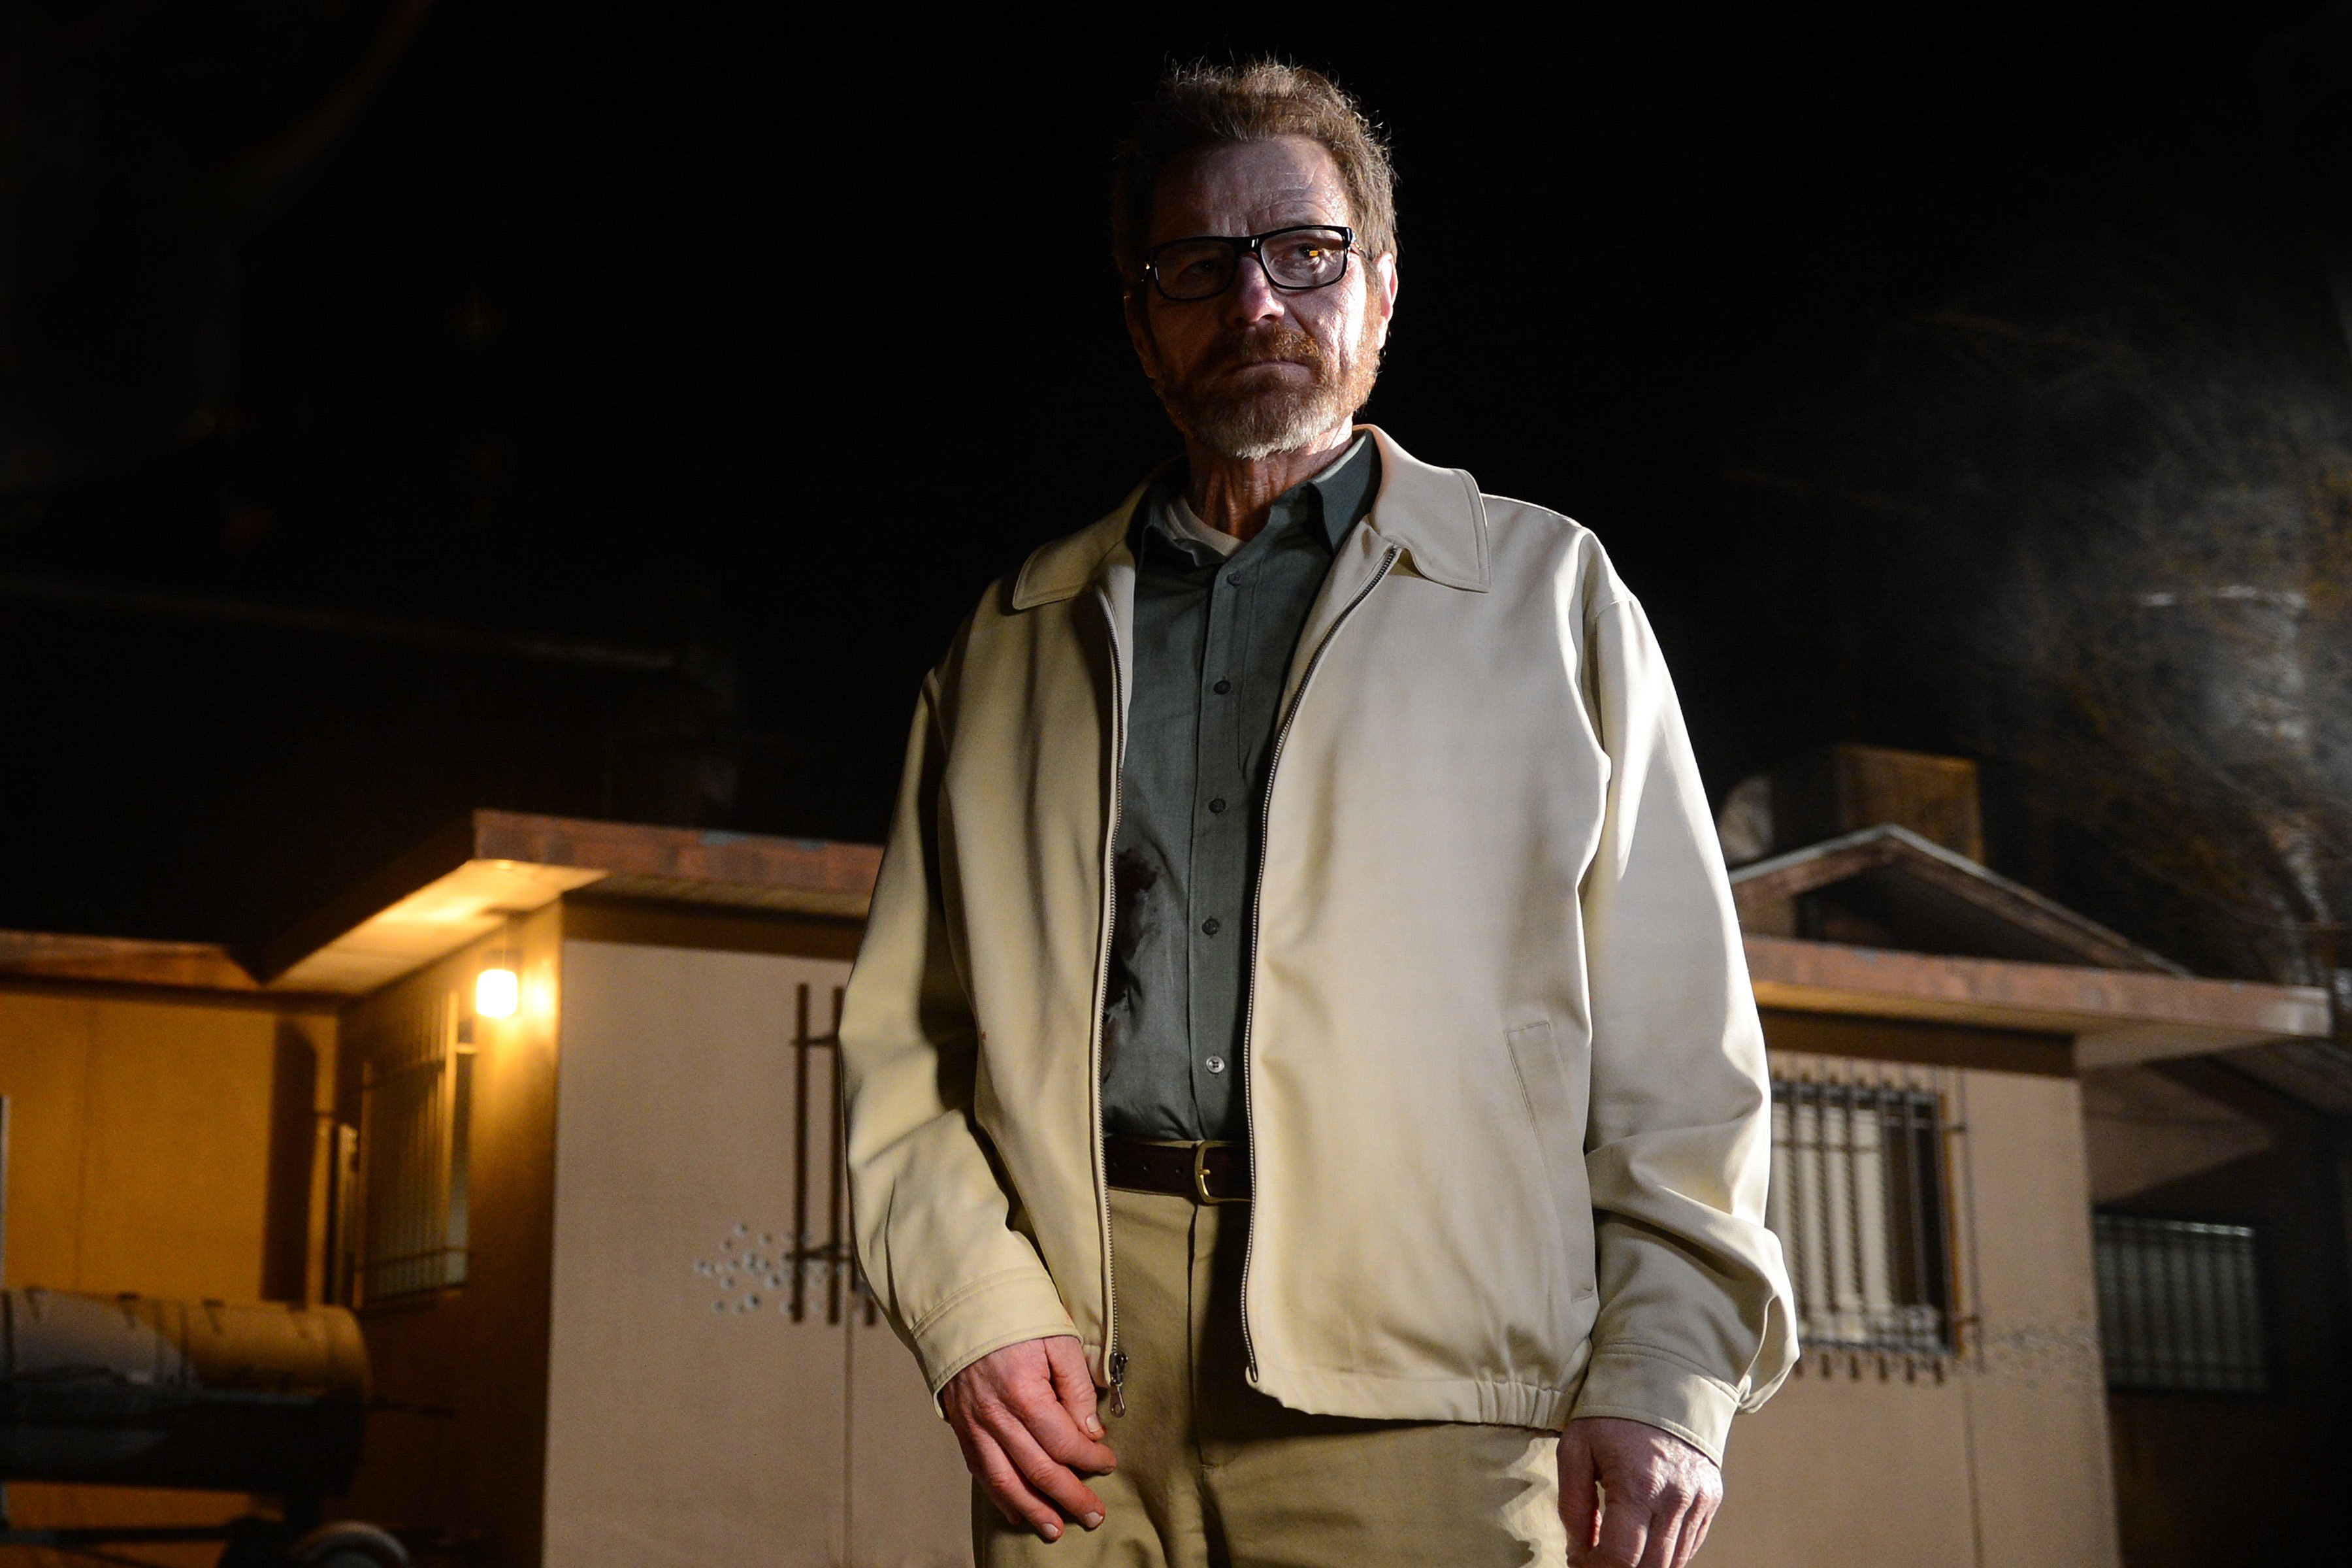 Breaking Bad': Walter White's Wardrobe Reflects His Descent Into Darkness  Becoming Heisenberg